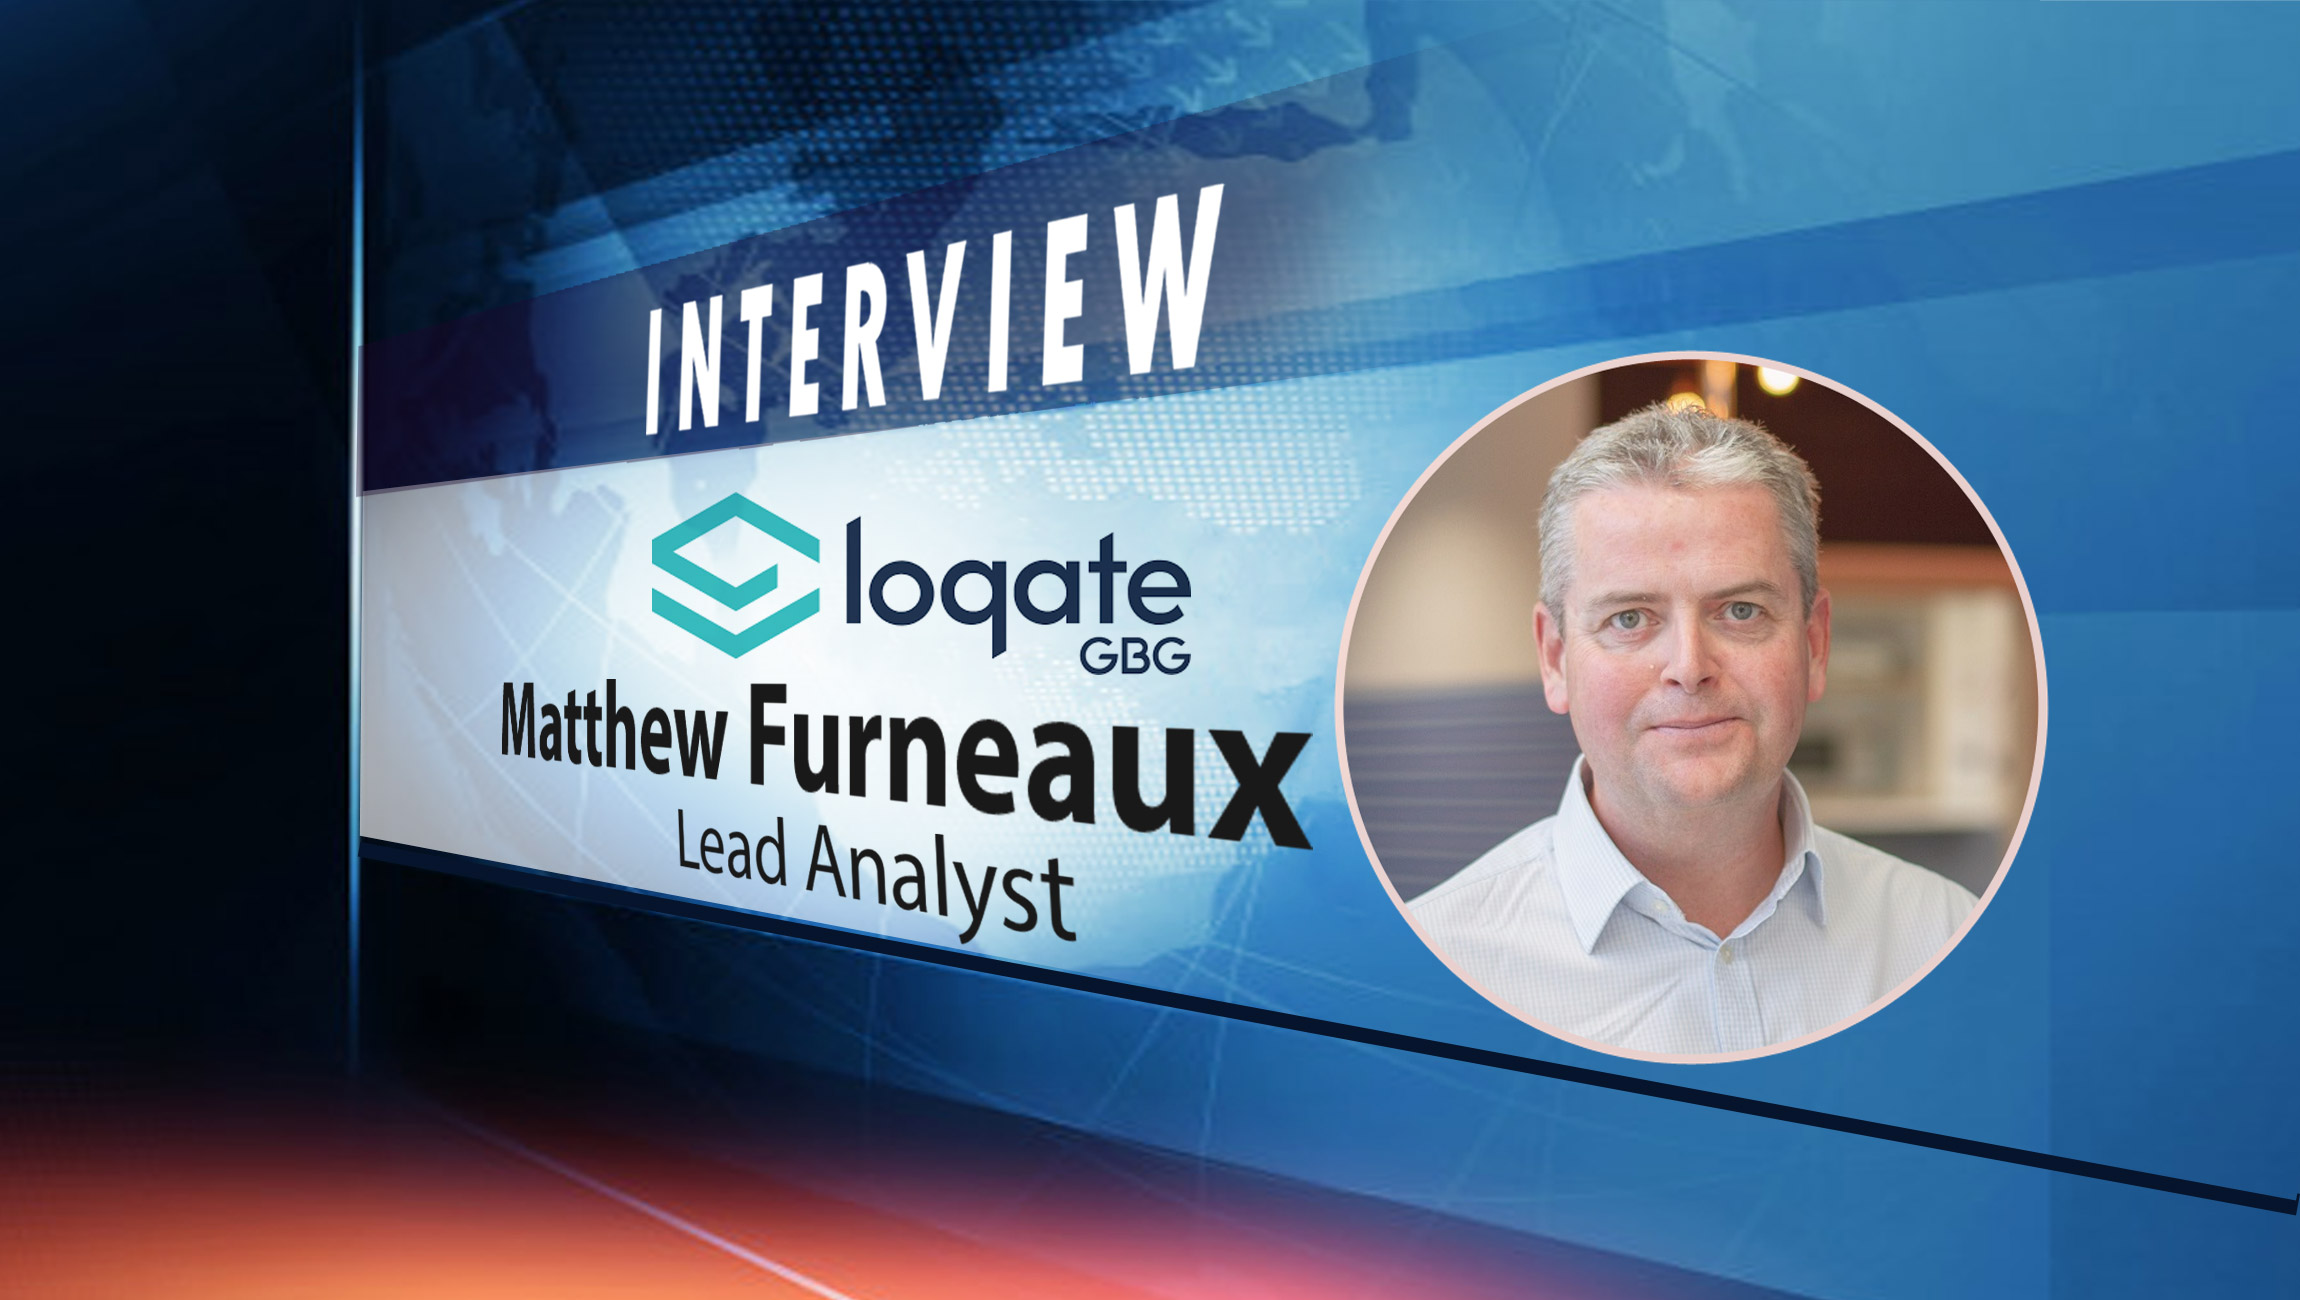 SalesTechStar Interview with Matthew Furneaux, Lead Analyst at Loqate